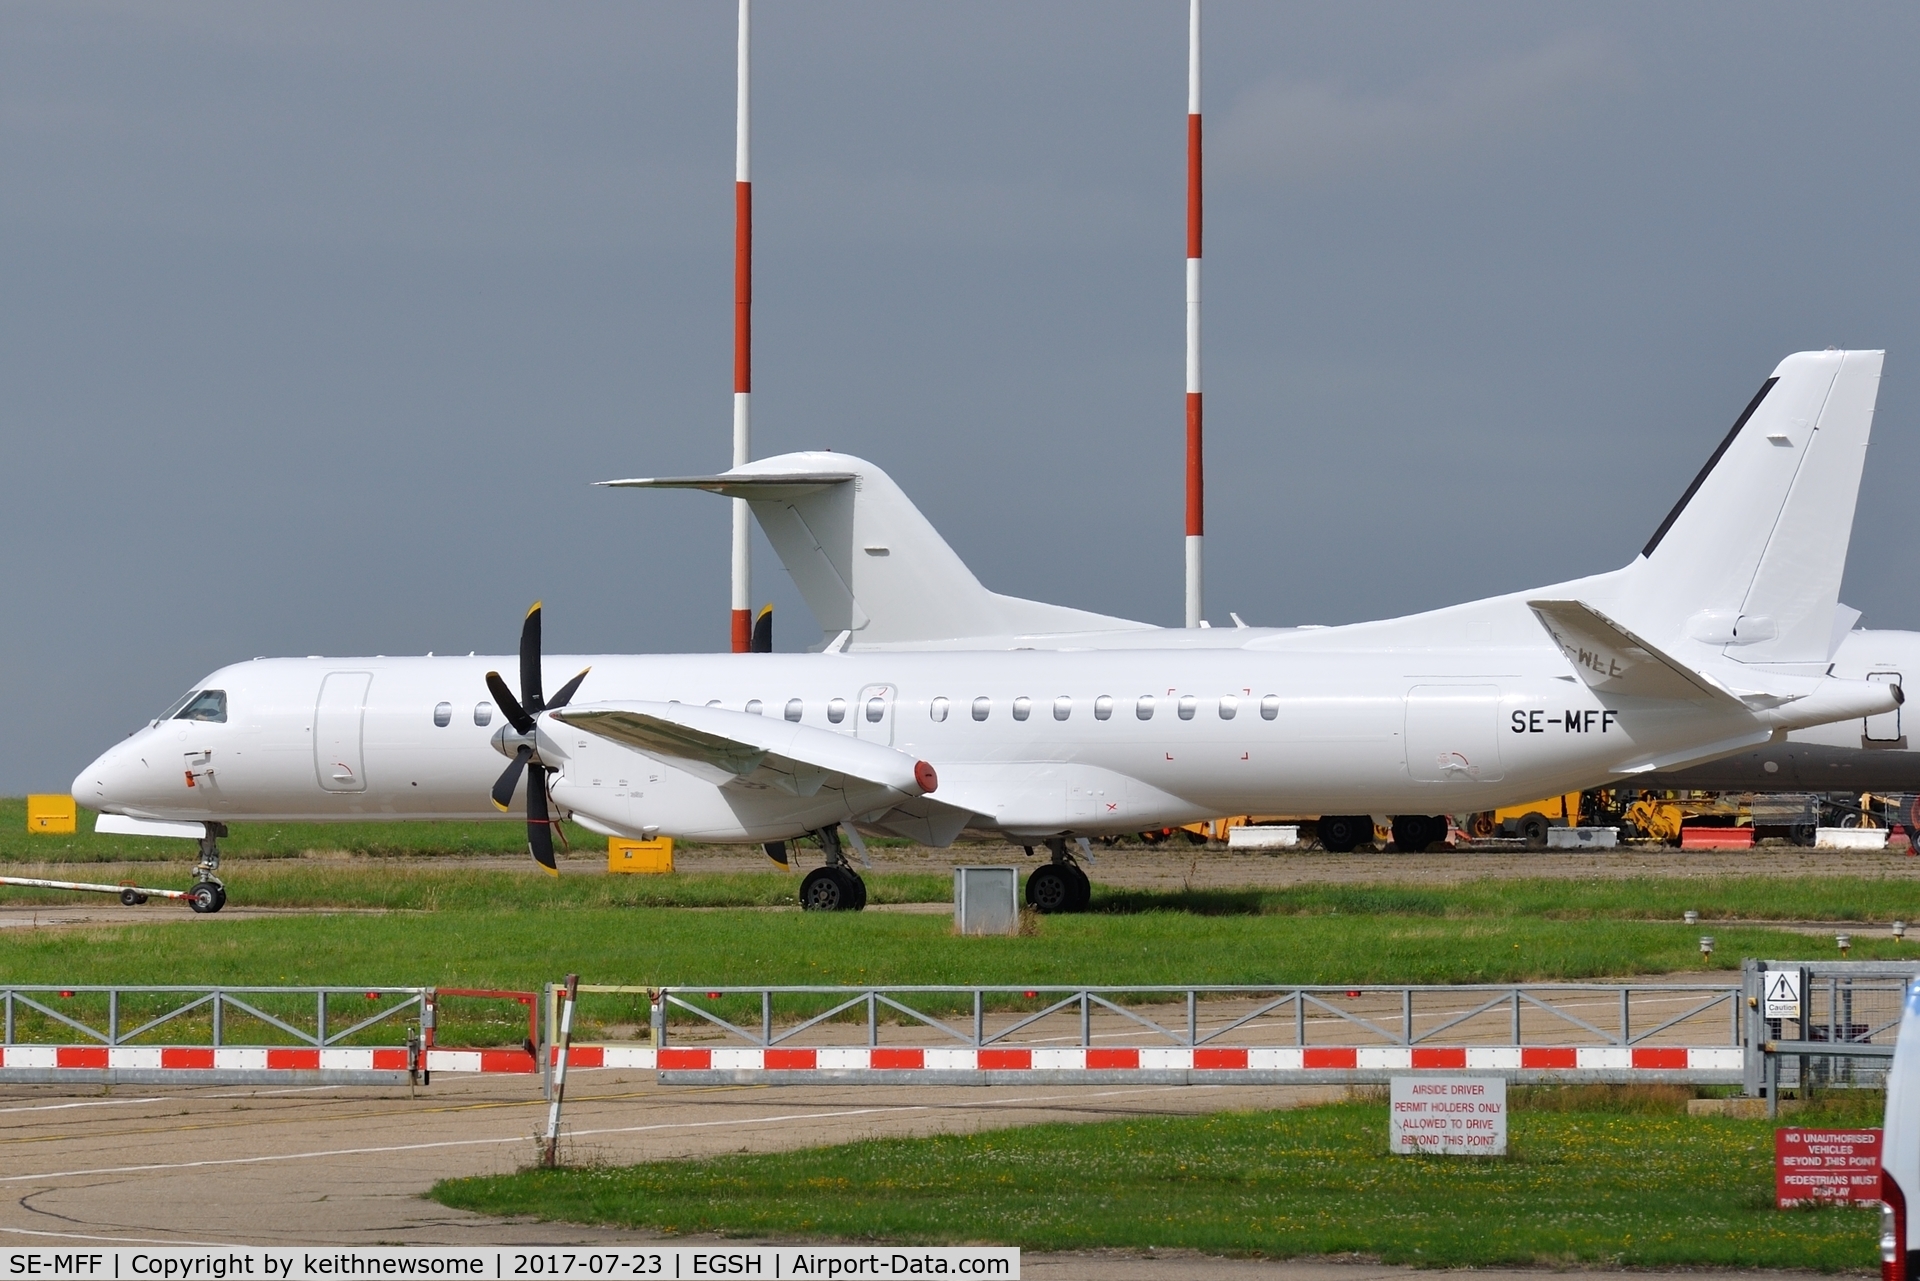 SE-MFF, 1996 Saab 2000 C/N 2000-038, Removed from spray all white colour scheme.